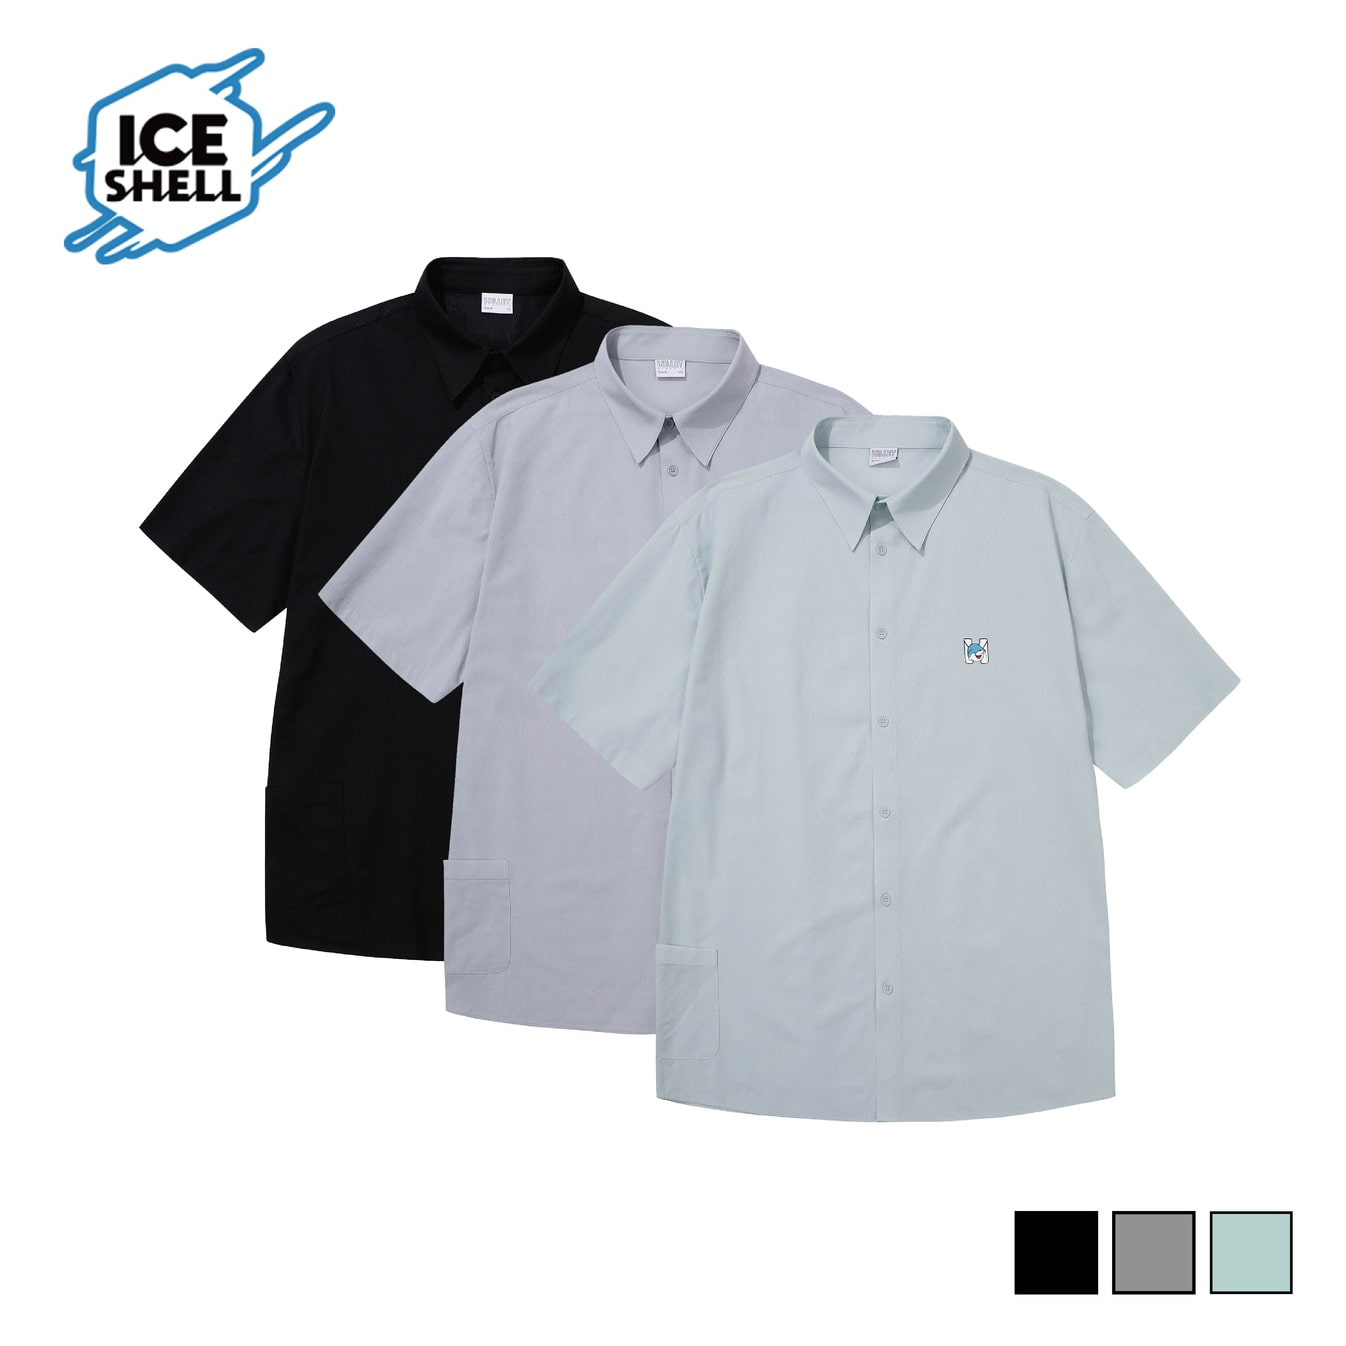 MCC SHORT SLEEVE ICE SHELL SHIRTS_SIDE POCKET_OVER FIT